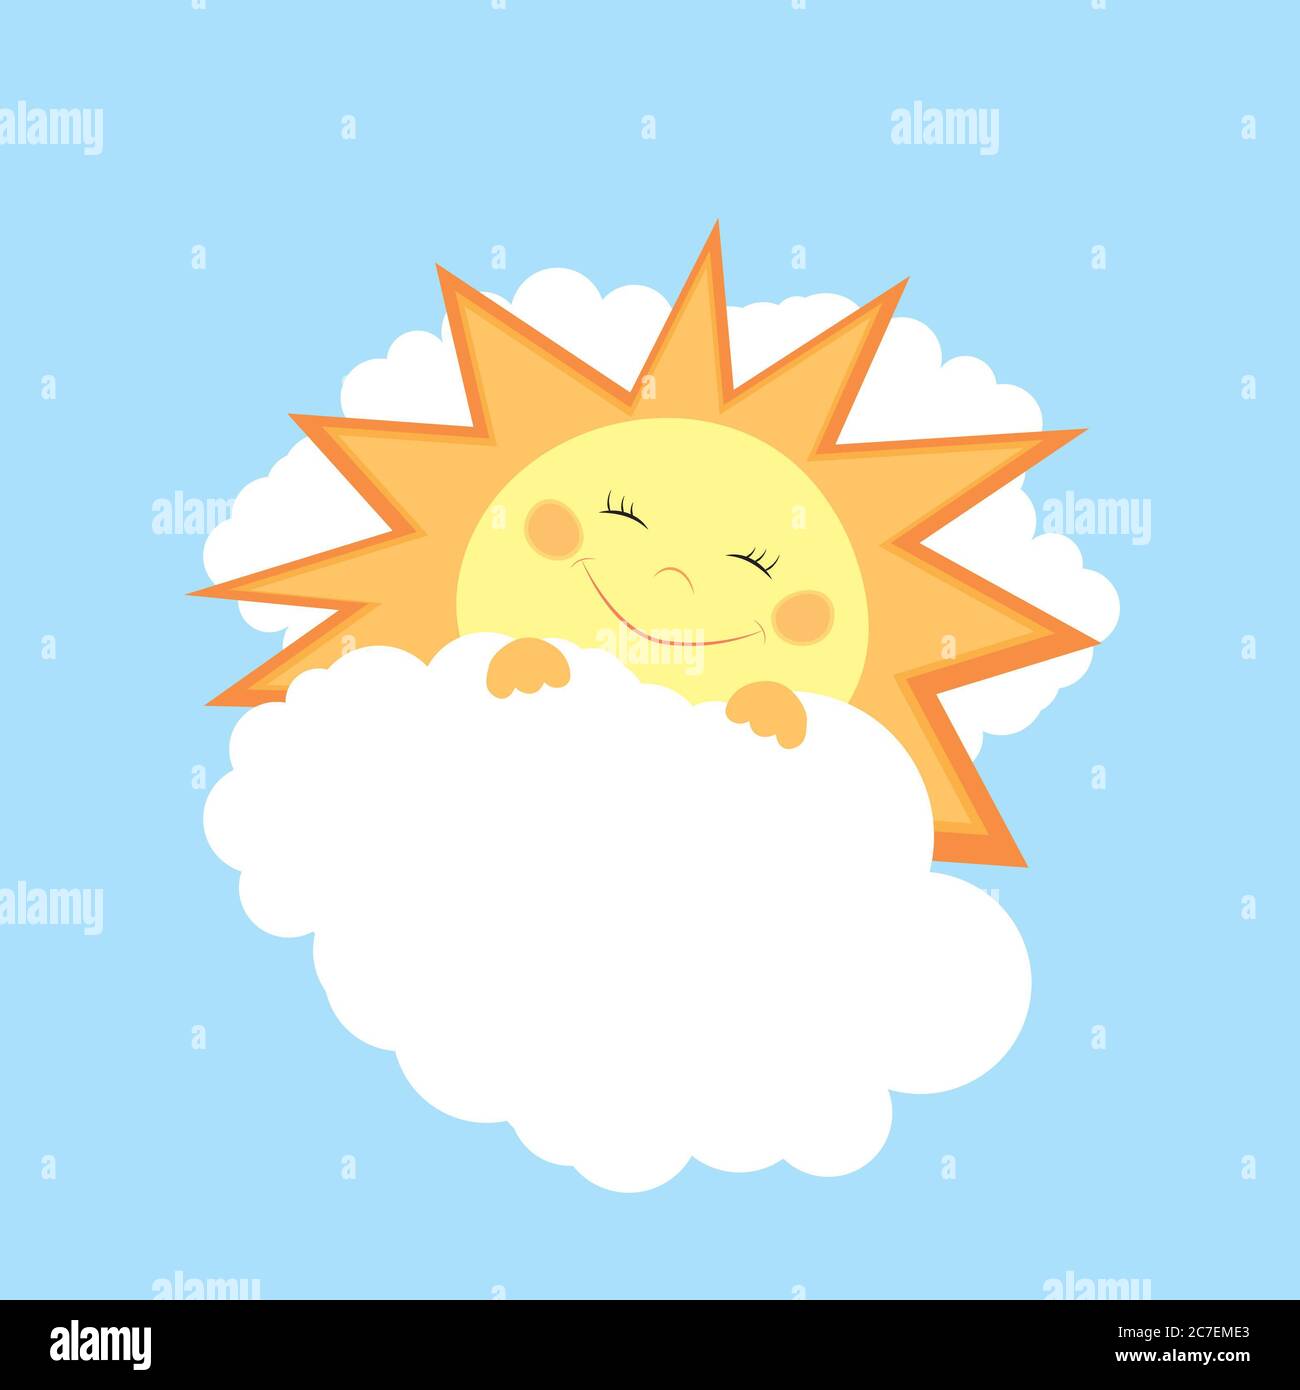 Background of smiling sun with clouds. Stock Photo